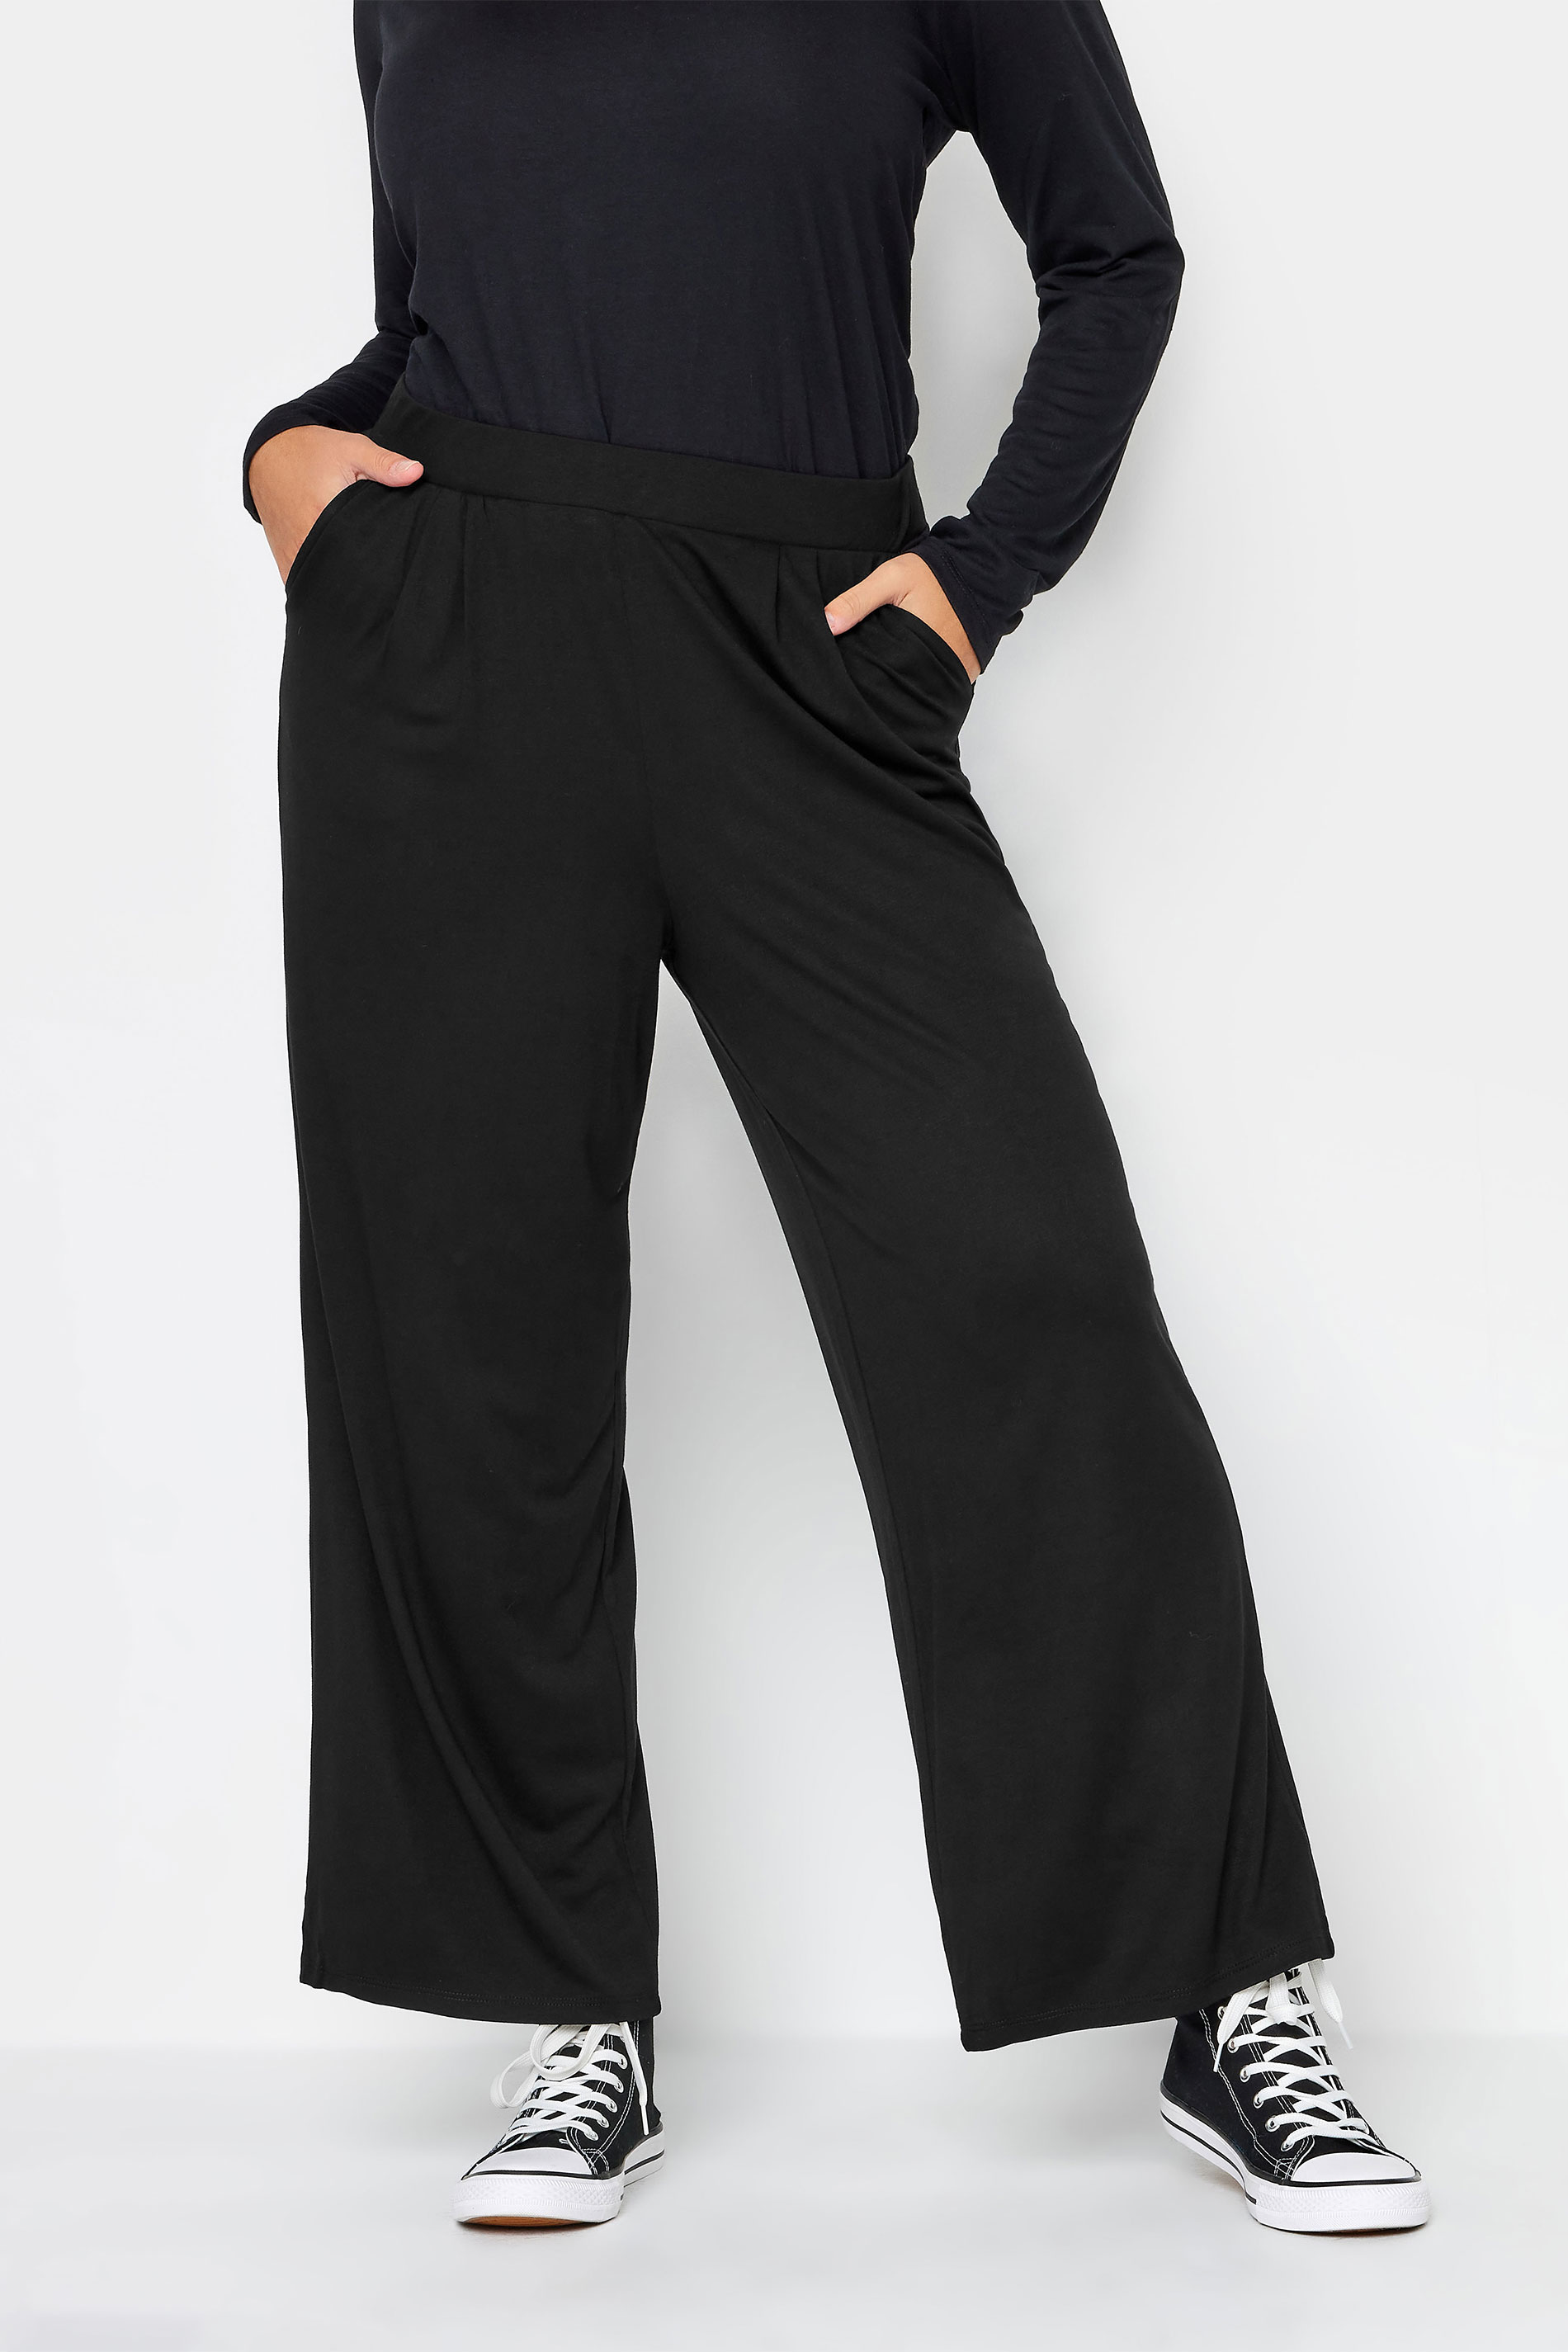 YOURS Curve Plus Size Black Pleated Wide Leg Stretch Trousers